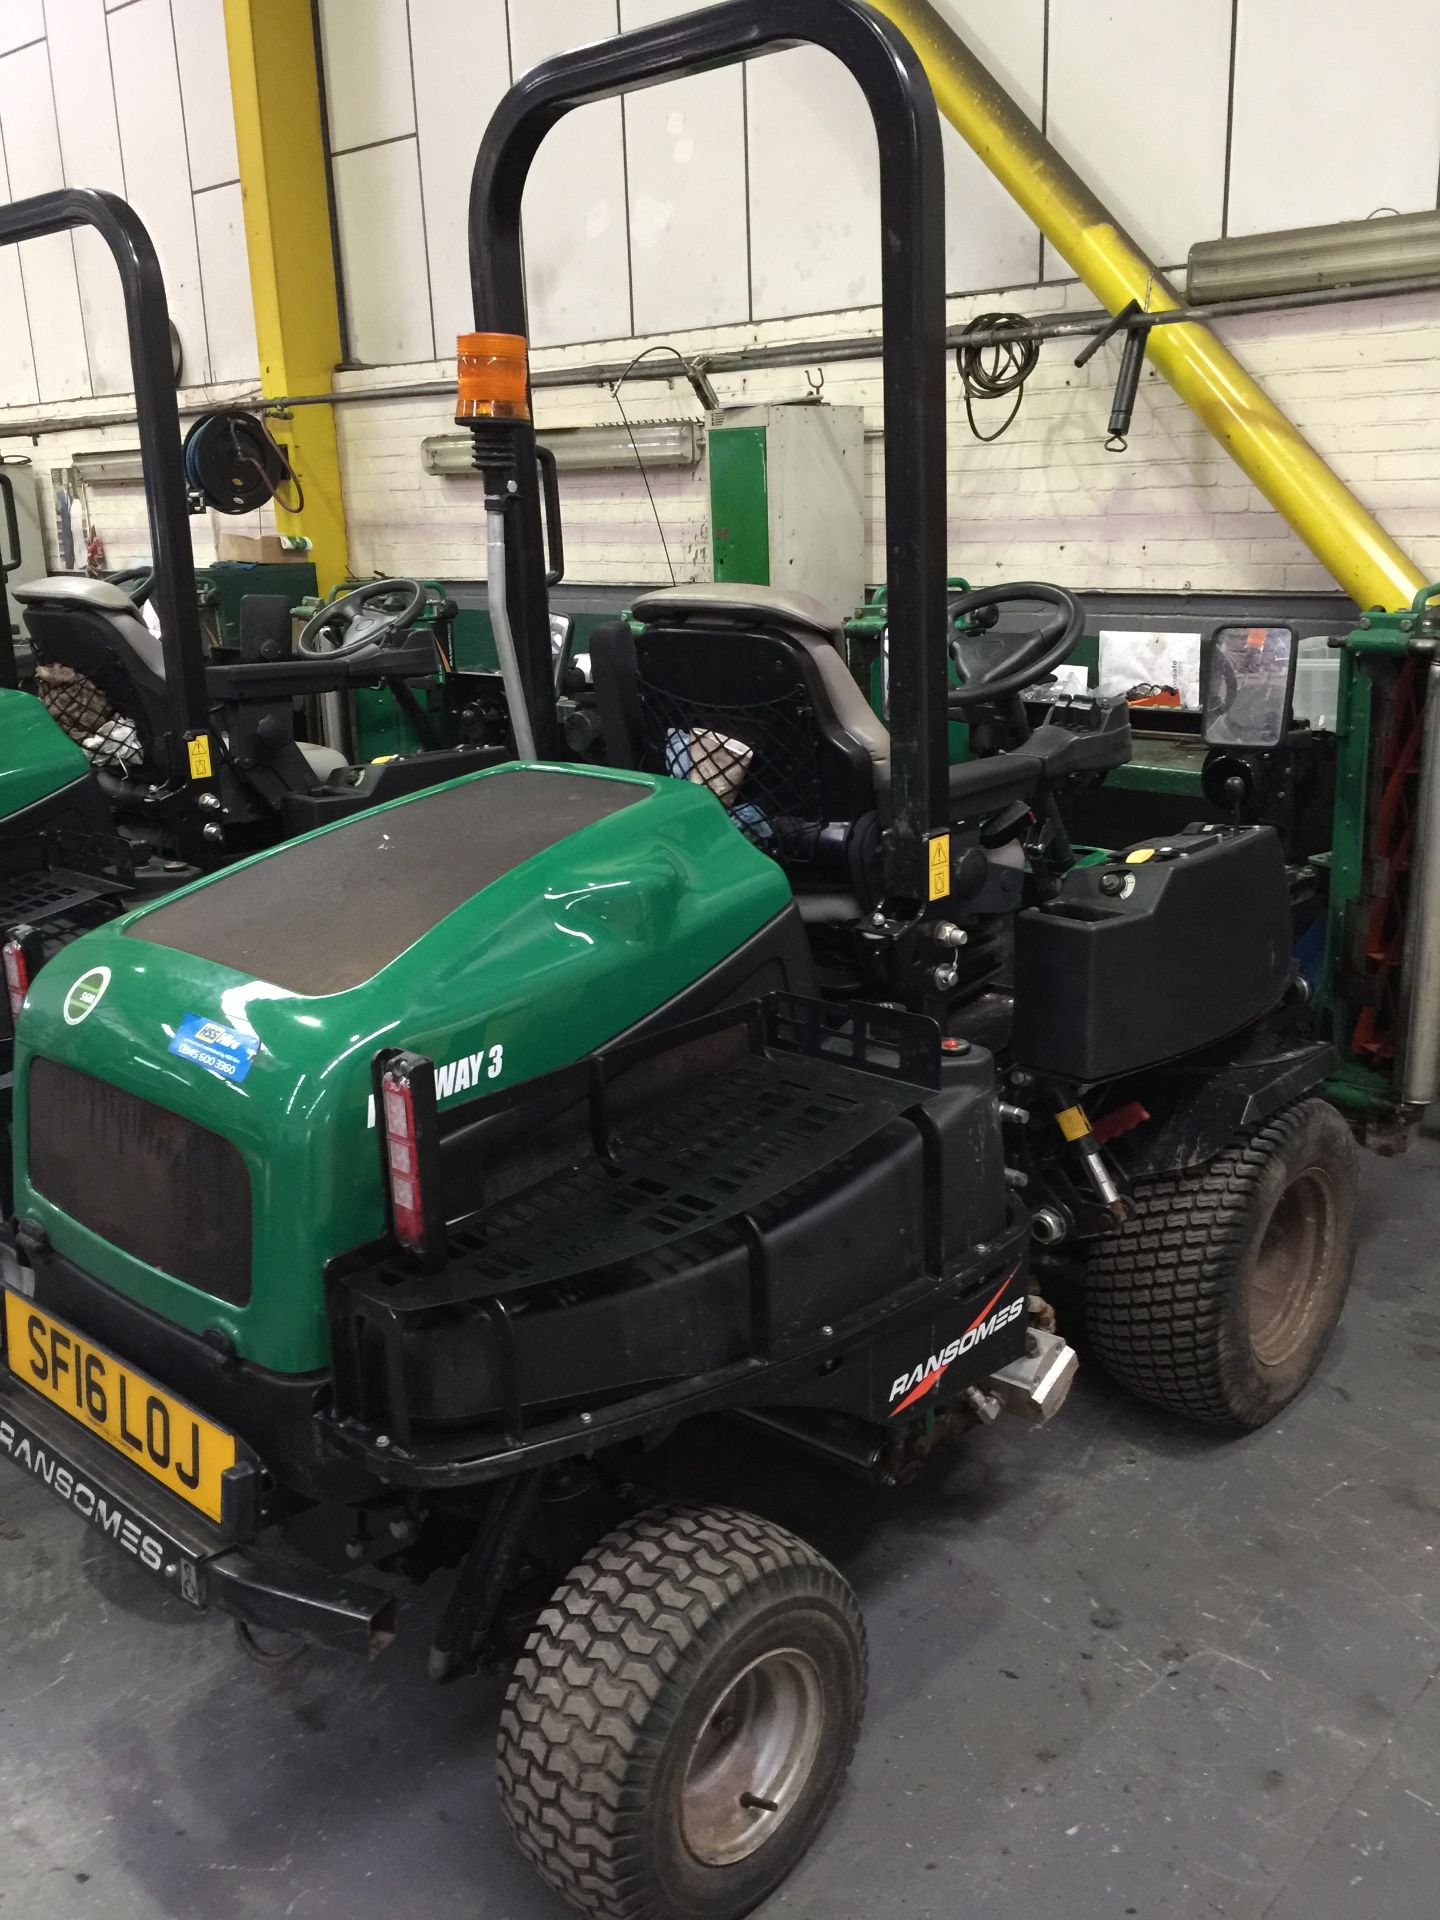 Ransomes Highway 3 LGEA340 4WD Ride on Mower - Image 3 of 7